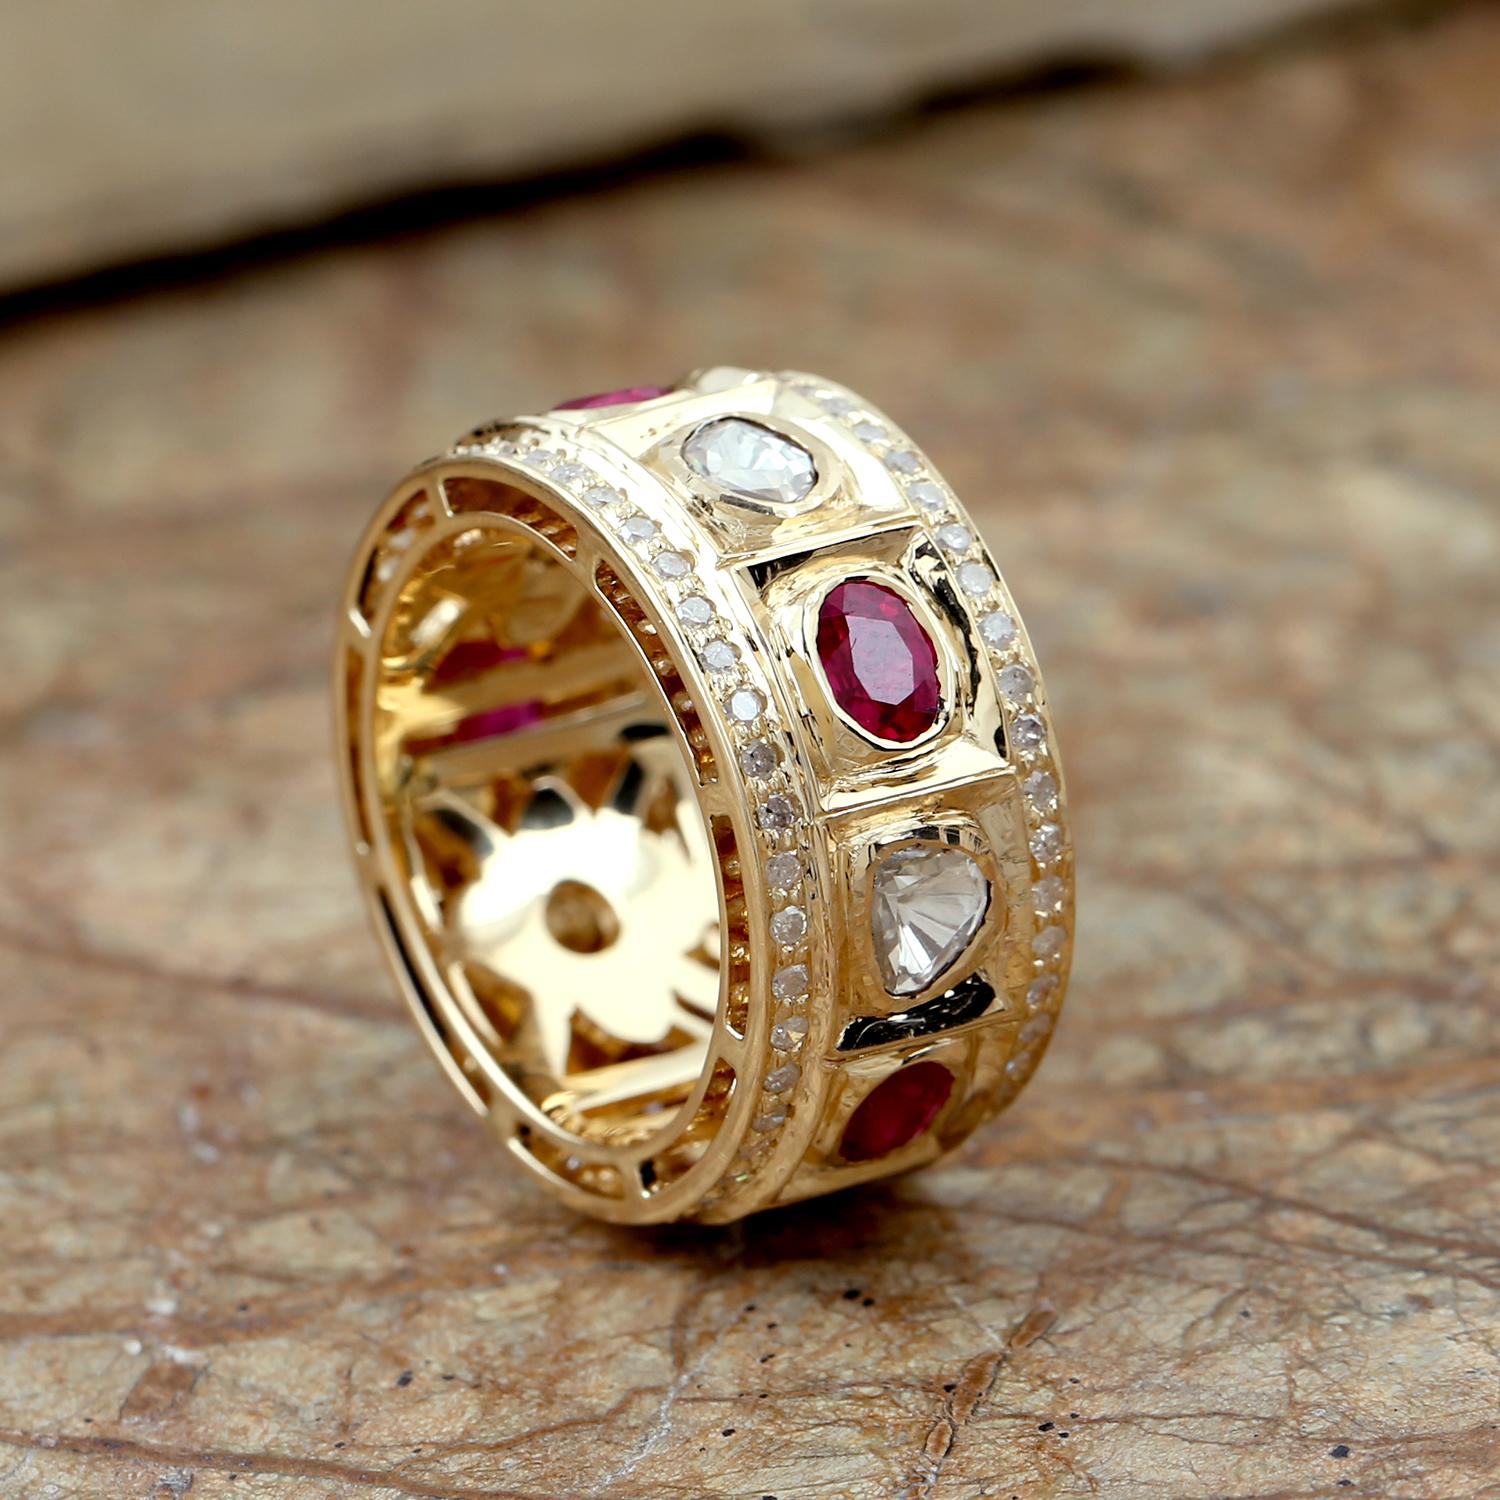 This beautiful band ring is made from 18k yellow gold and features a row of rubies and polki diamonds with a set of pave diamond . The rubies are a deep, rich red color and are interspersed with sparkling polki diamonds, which add a touch of shine